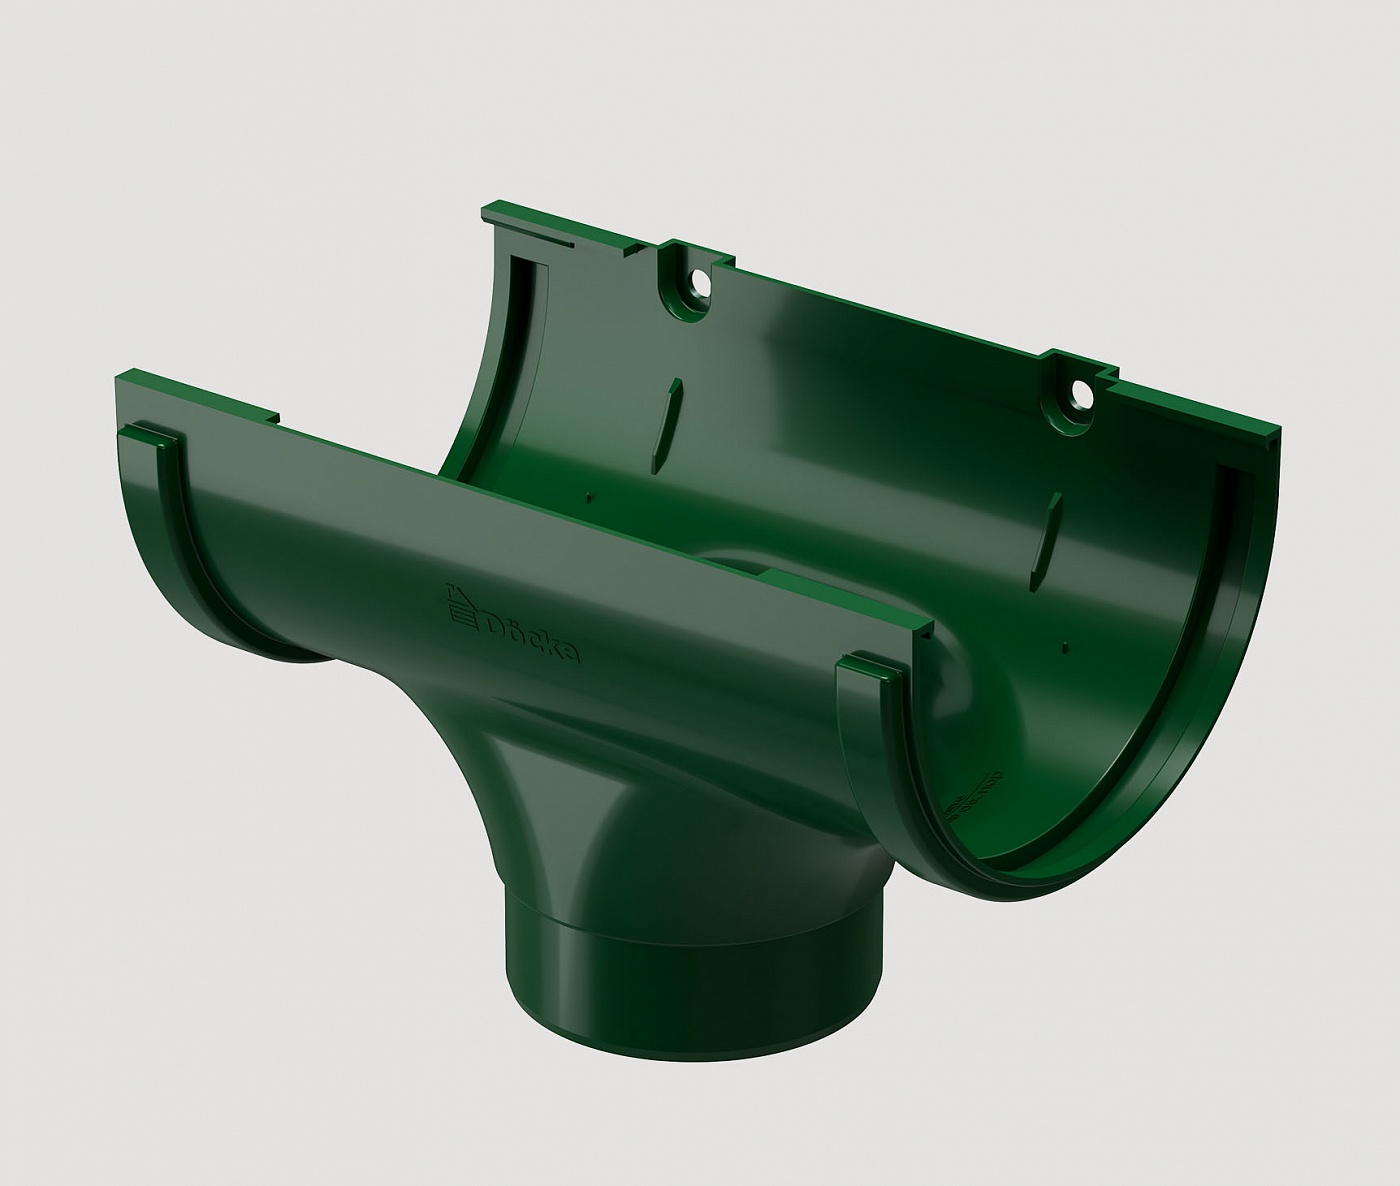 Водостоки - STANDARD SERIES Green RAL 6005 - Elements of the drainage system - Outlet